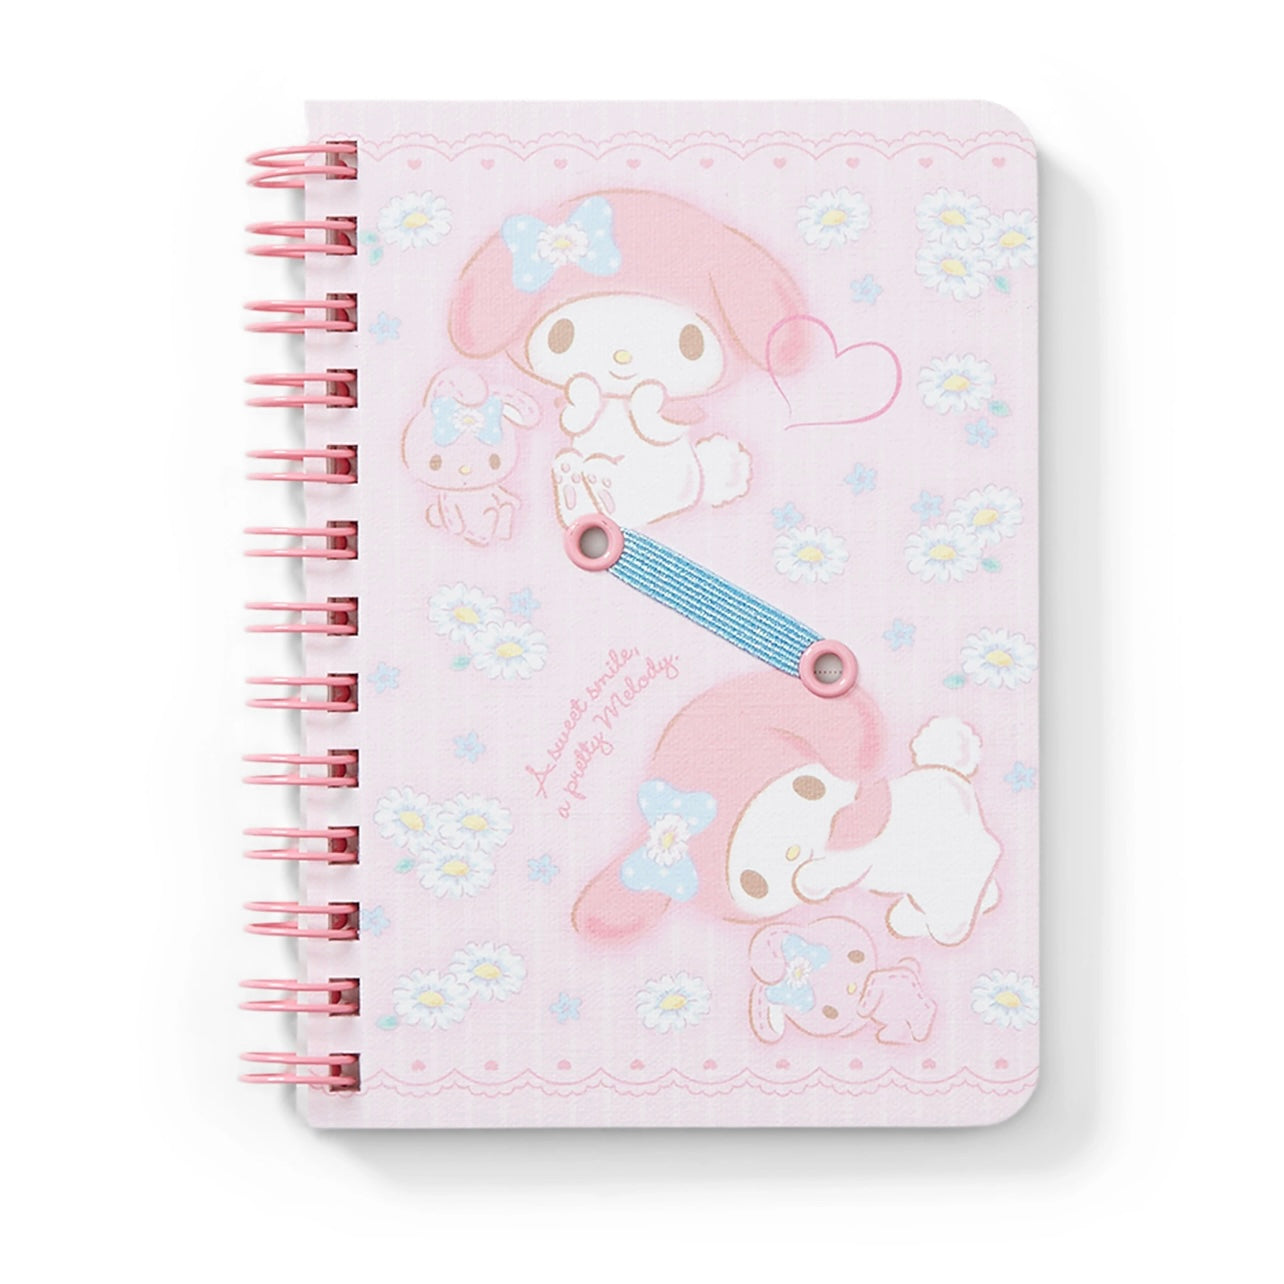 My Melody Sanrio B6 Spiral Notebook with Pen Holder Loop ship w/ tracking  no.